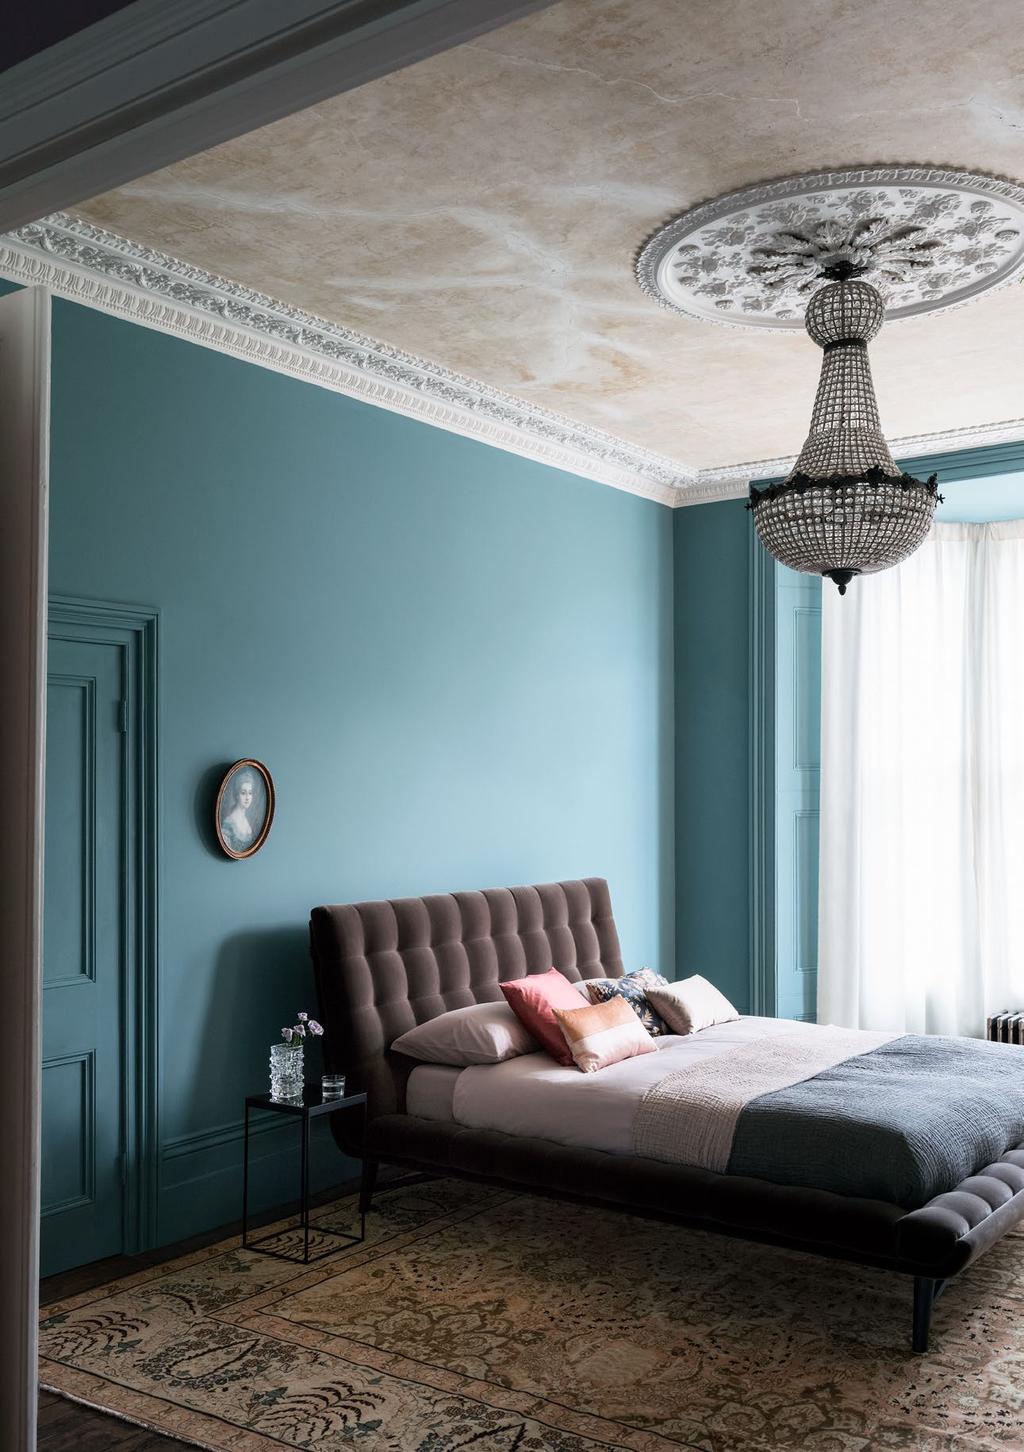 MONOCHROMATIC SINGLE COLOUR Use one bold colour on walls and woodwork to evoke an essence of confidence and clarity, beyond that which can be achieved through stepped tones or neutrals.